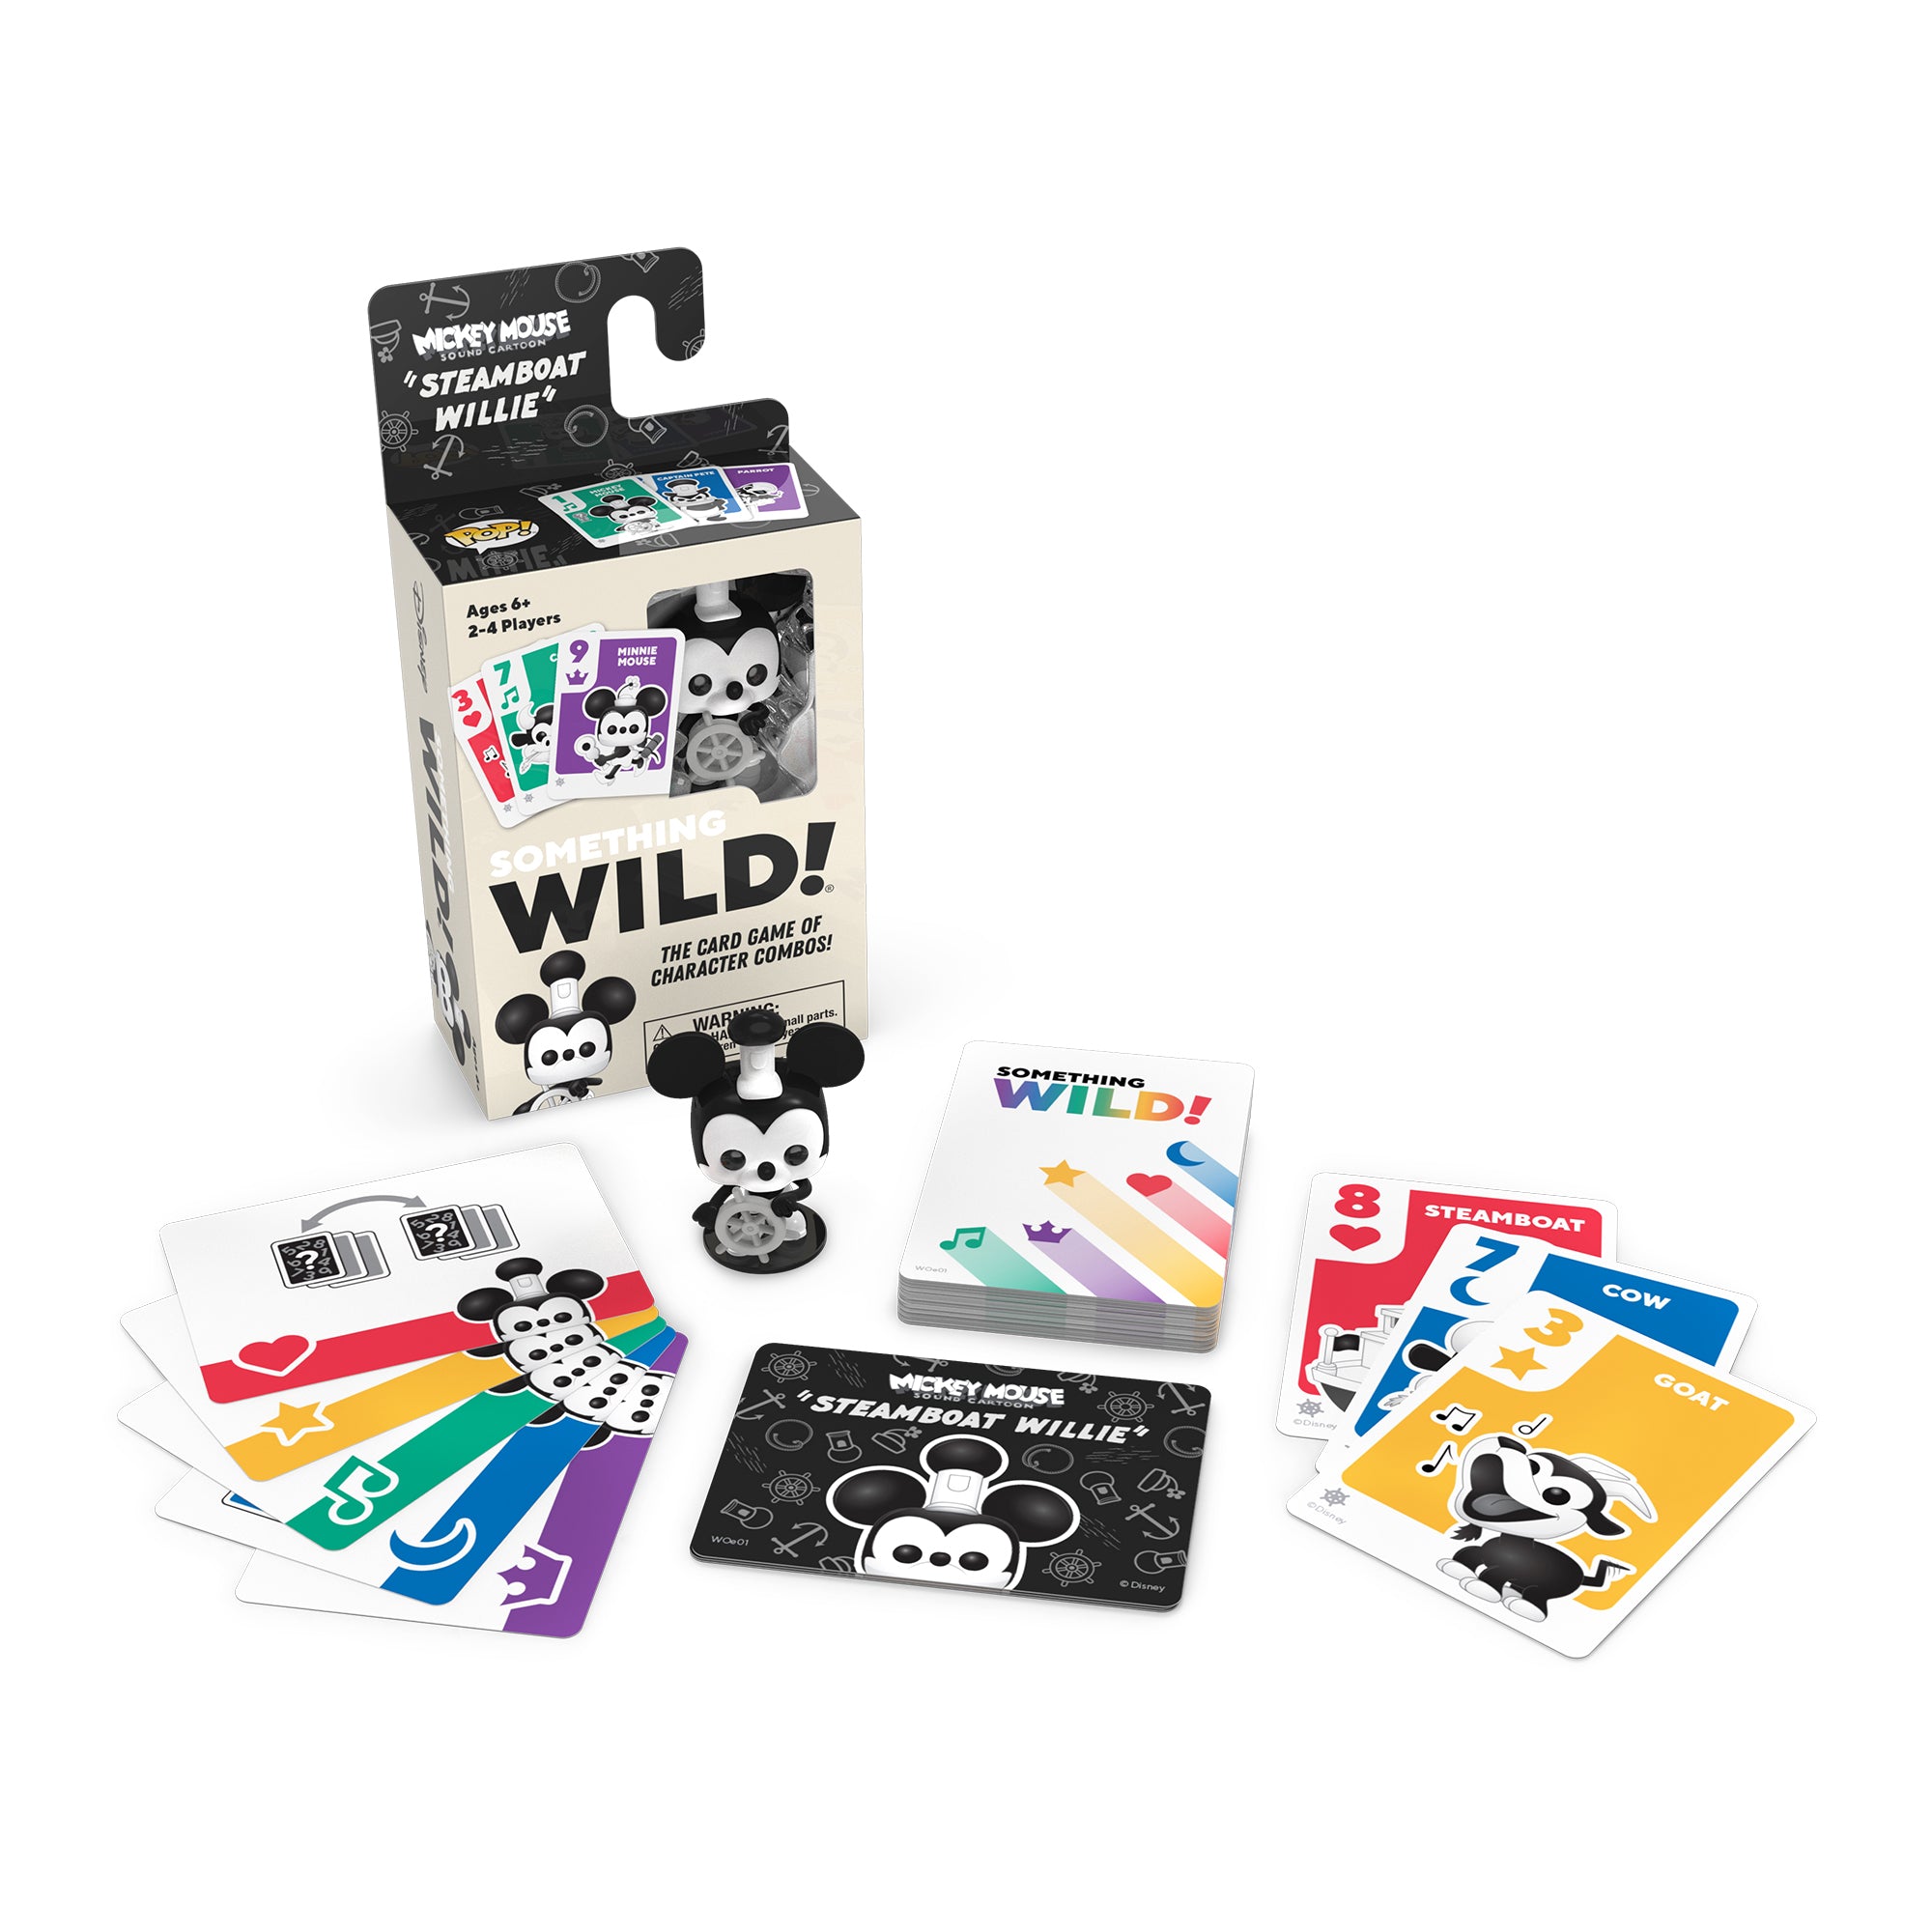 Funko Games: Something Wild Card Game - Steamboat Willie